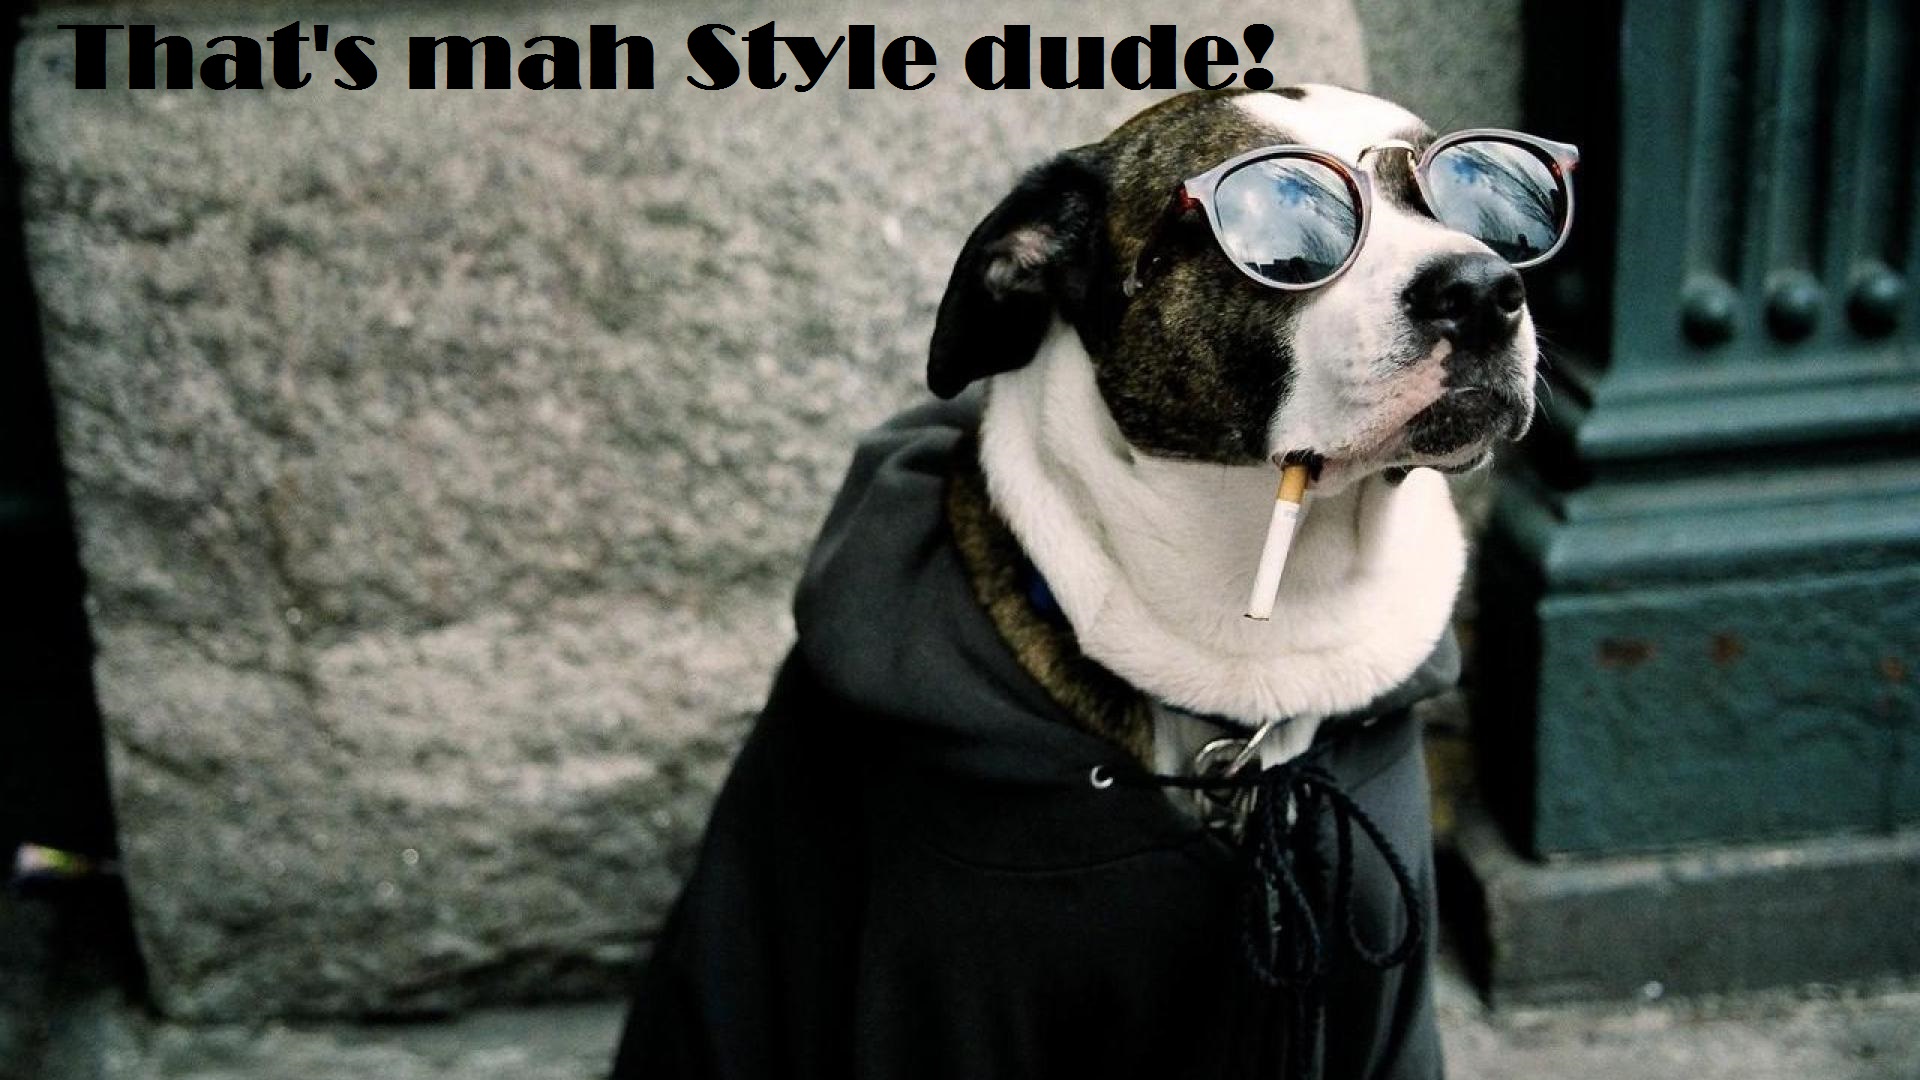 Thats Mah Style Dude - Dog with cooling glasses